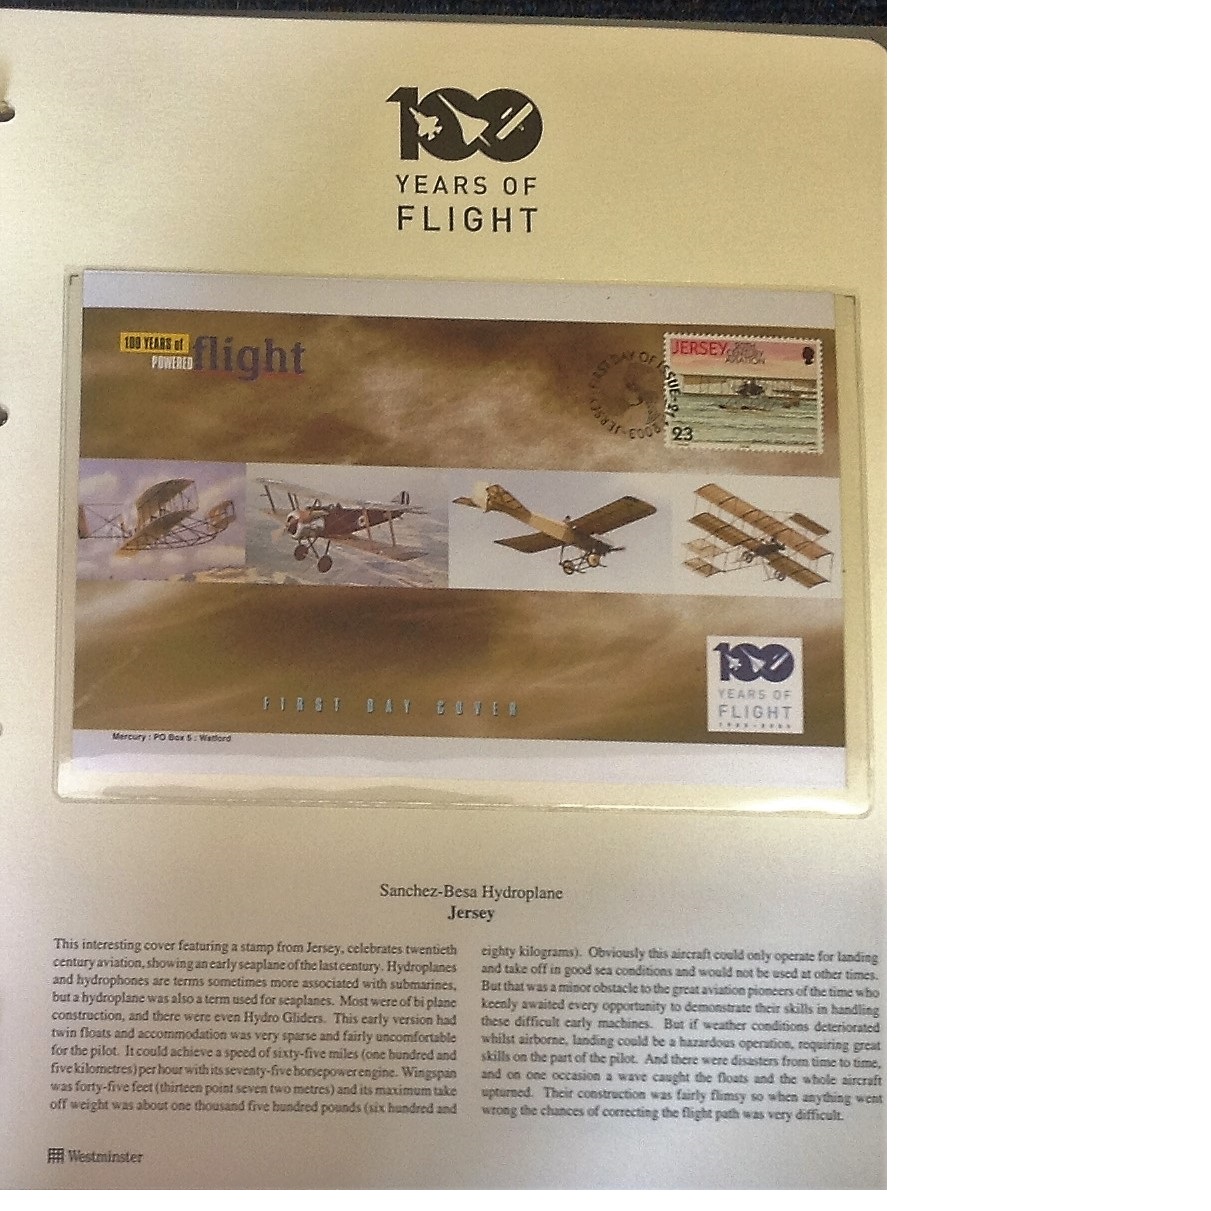 Aviation collection 100 years of flight includes 23 FDC and Coin covers featuring iconic planes - Image 3 of 8